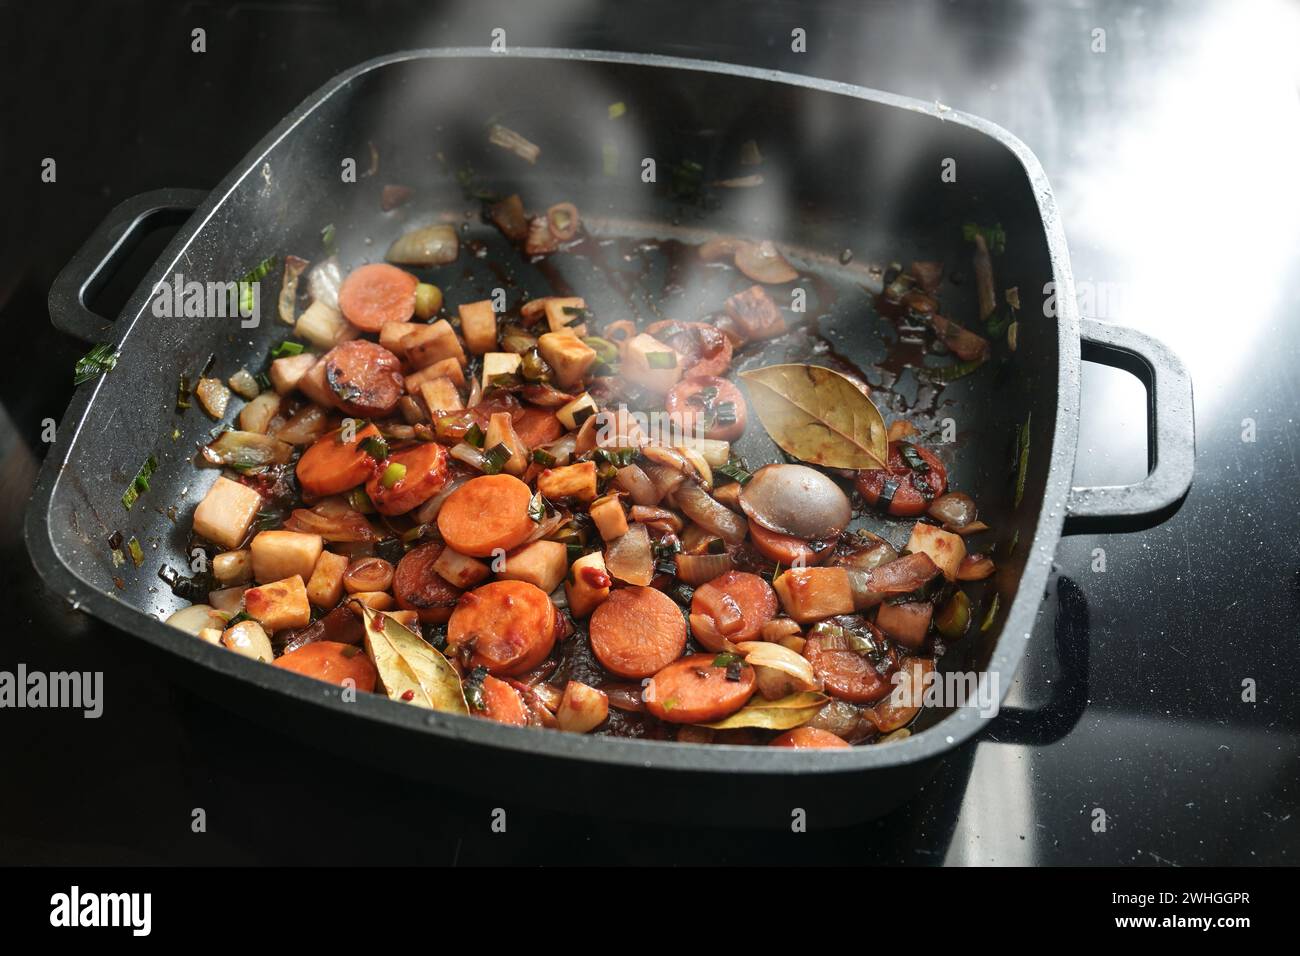 Roasted vegetables for a tasty sauce base in a black cooking pan with carrots, onions, leeks, celery and bay leaves, copy space, Stock Photo